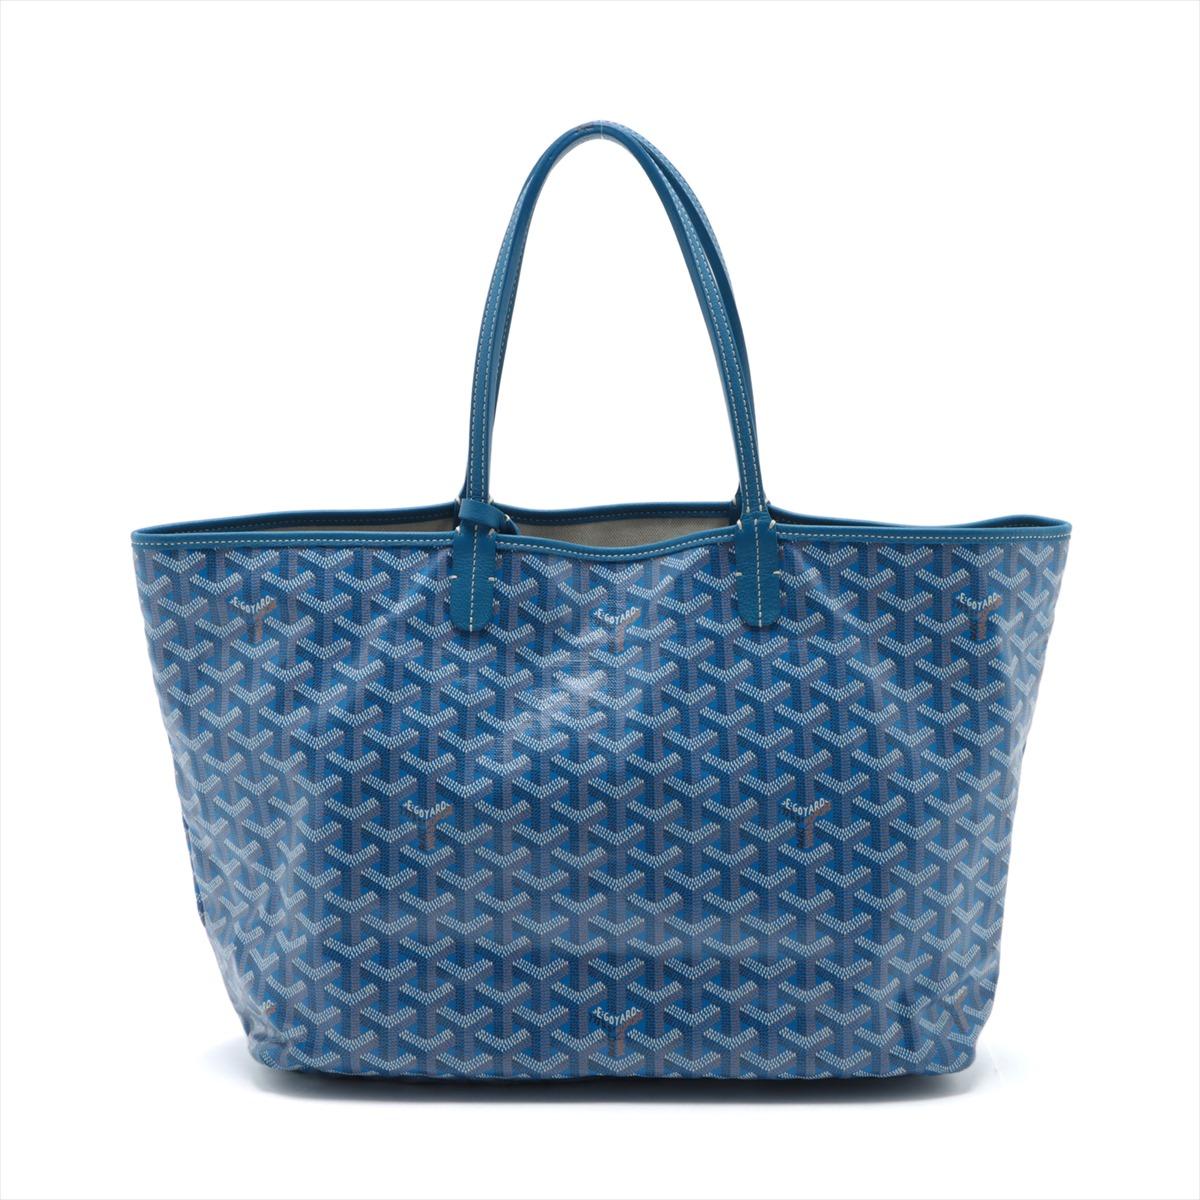 The Goyard Saint Louis PM Tote Bag in Blue epitomizes timeless elegance and practical luxury. Meticulously crafted by the prestigious French maison, Goyard, the iconic tote features brand's signature Chevron print on durable and water-resistant